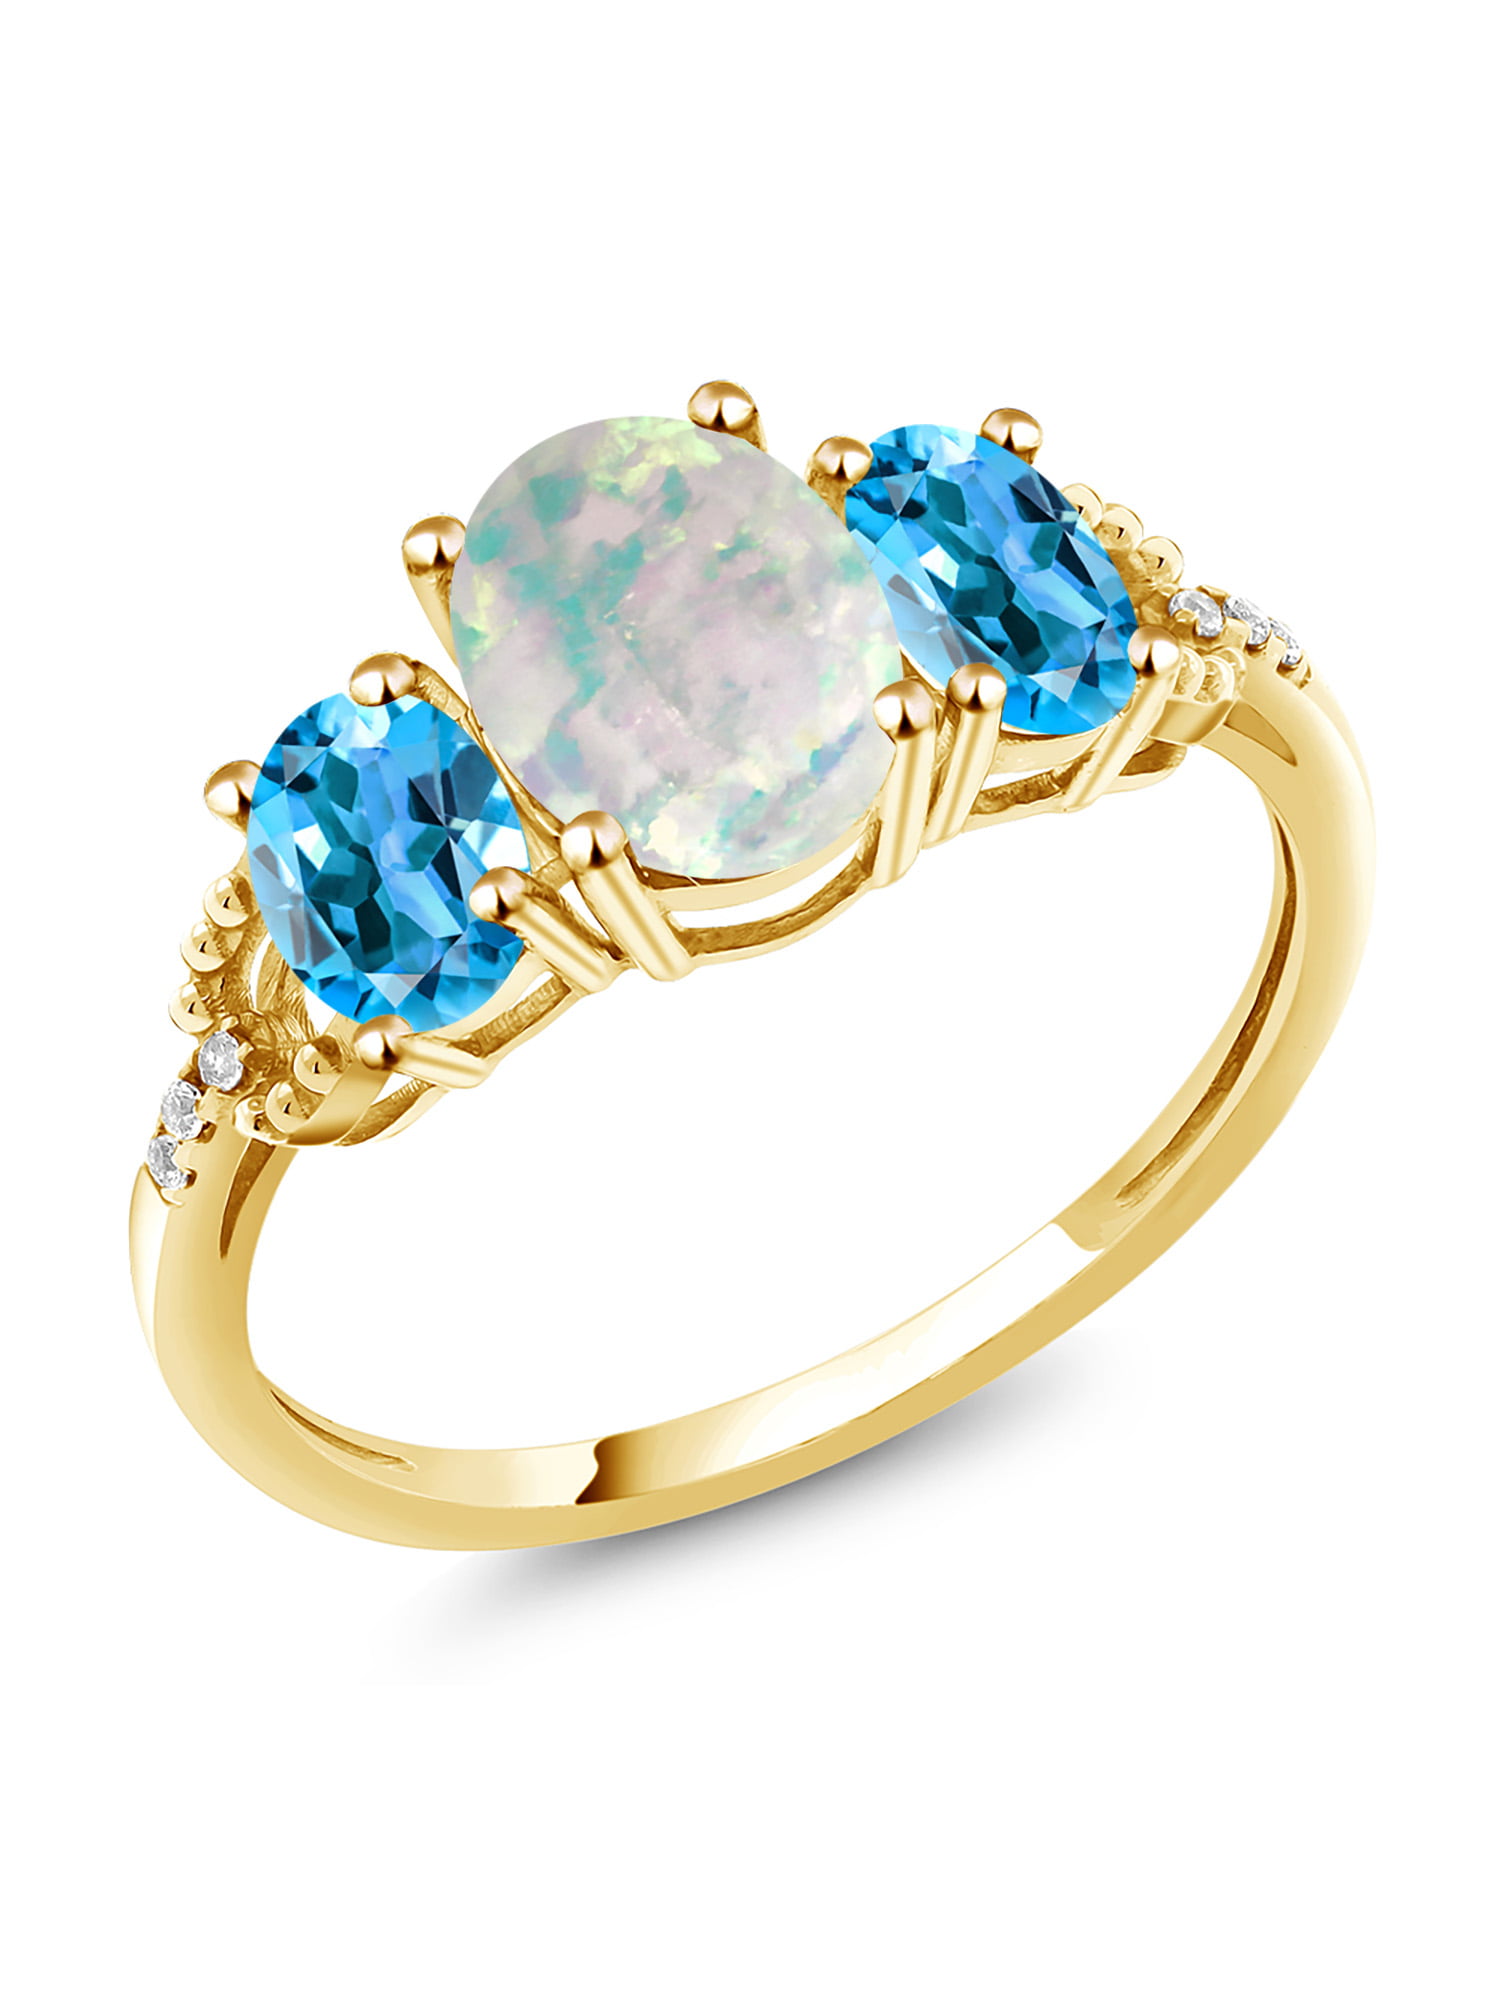 Gem Stone King 2.14 Ct Oval Cabochon White Simulated Opal Swiss Blue Topaz  10K Yellow Gold Ring